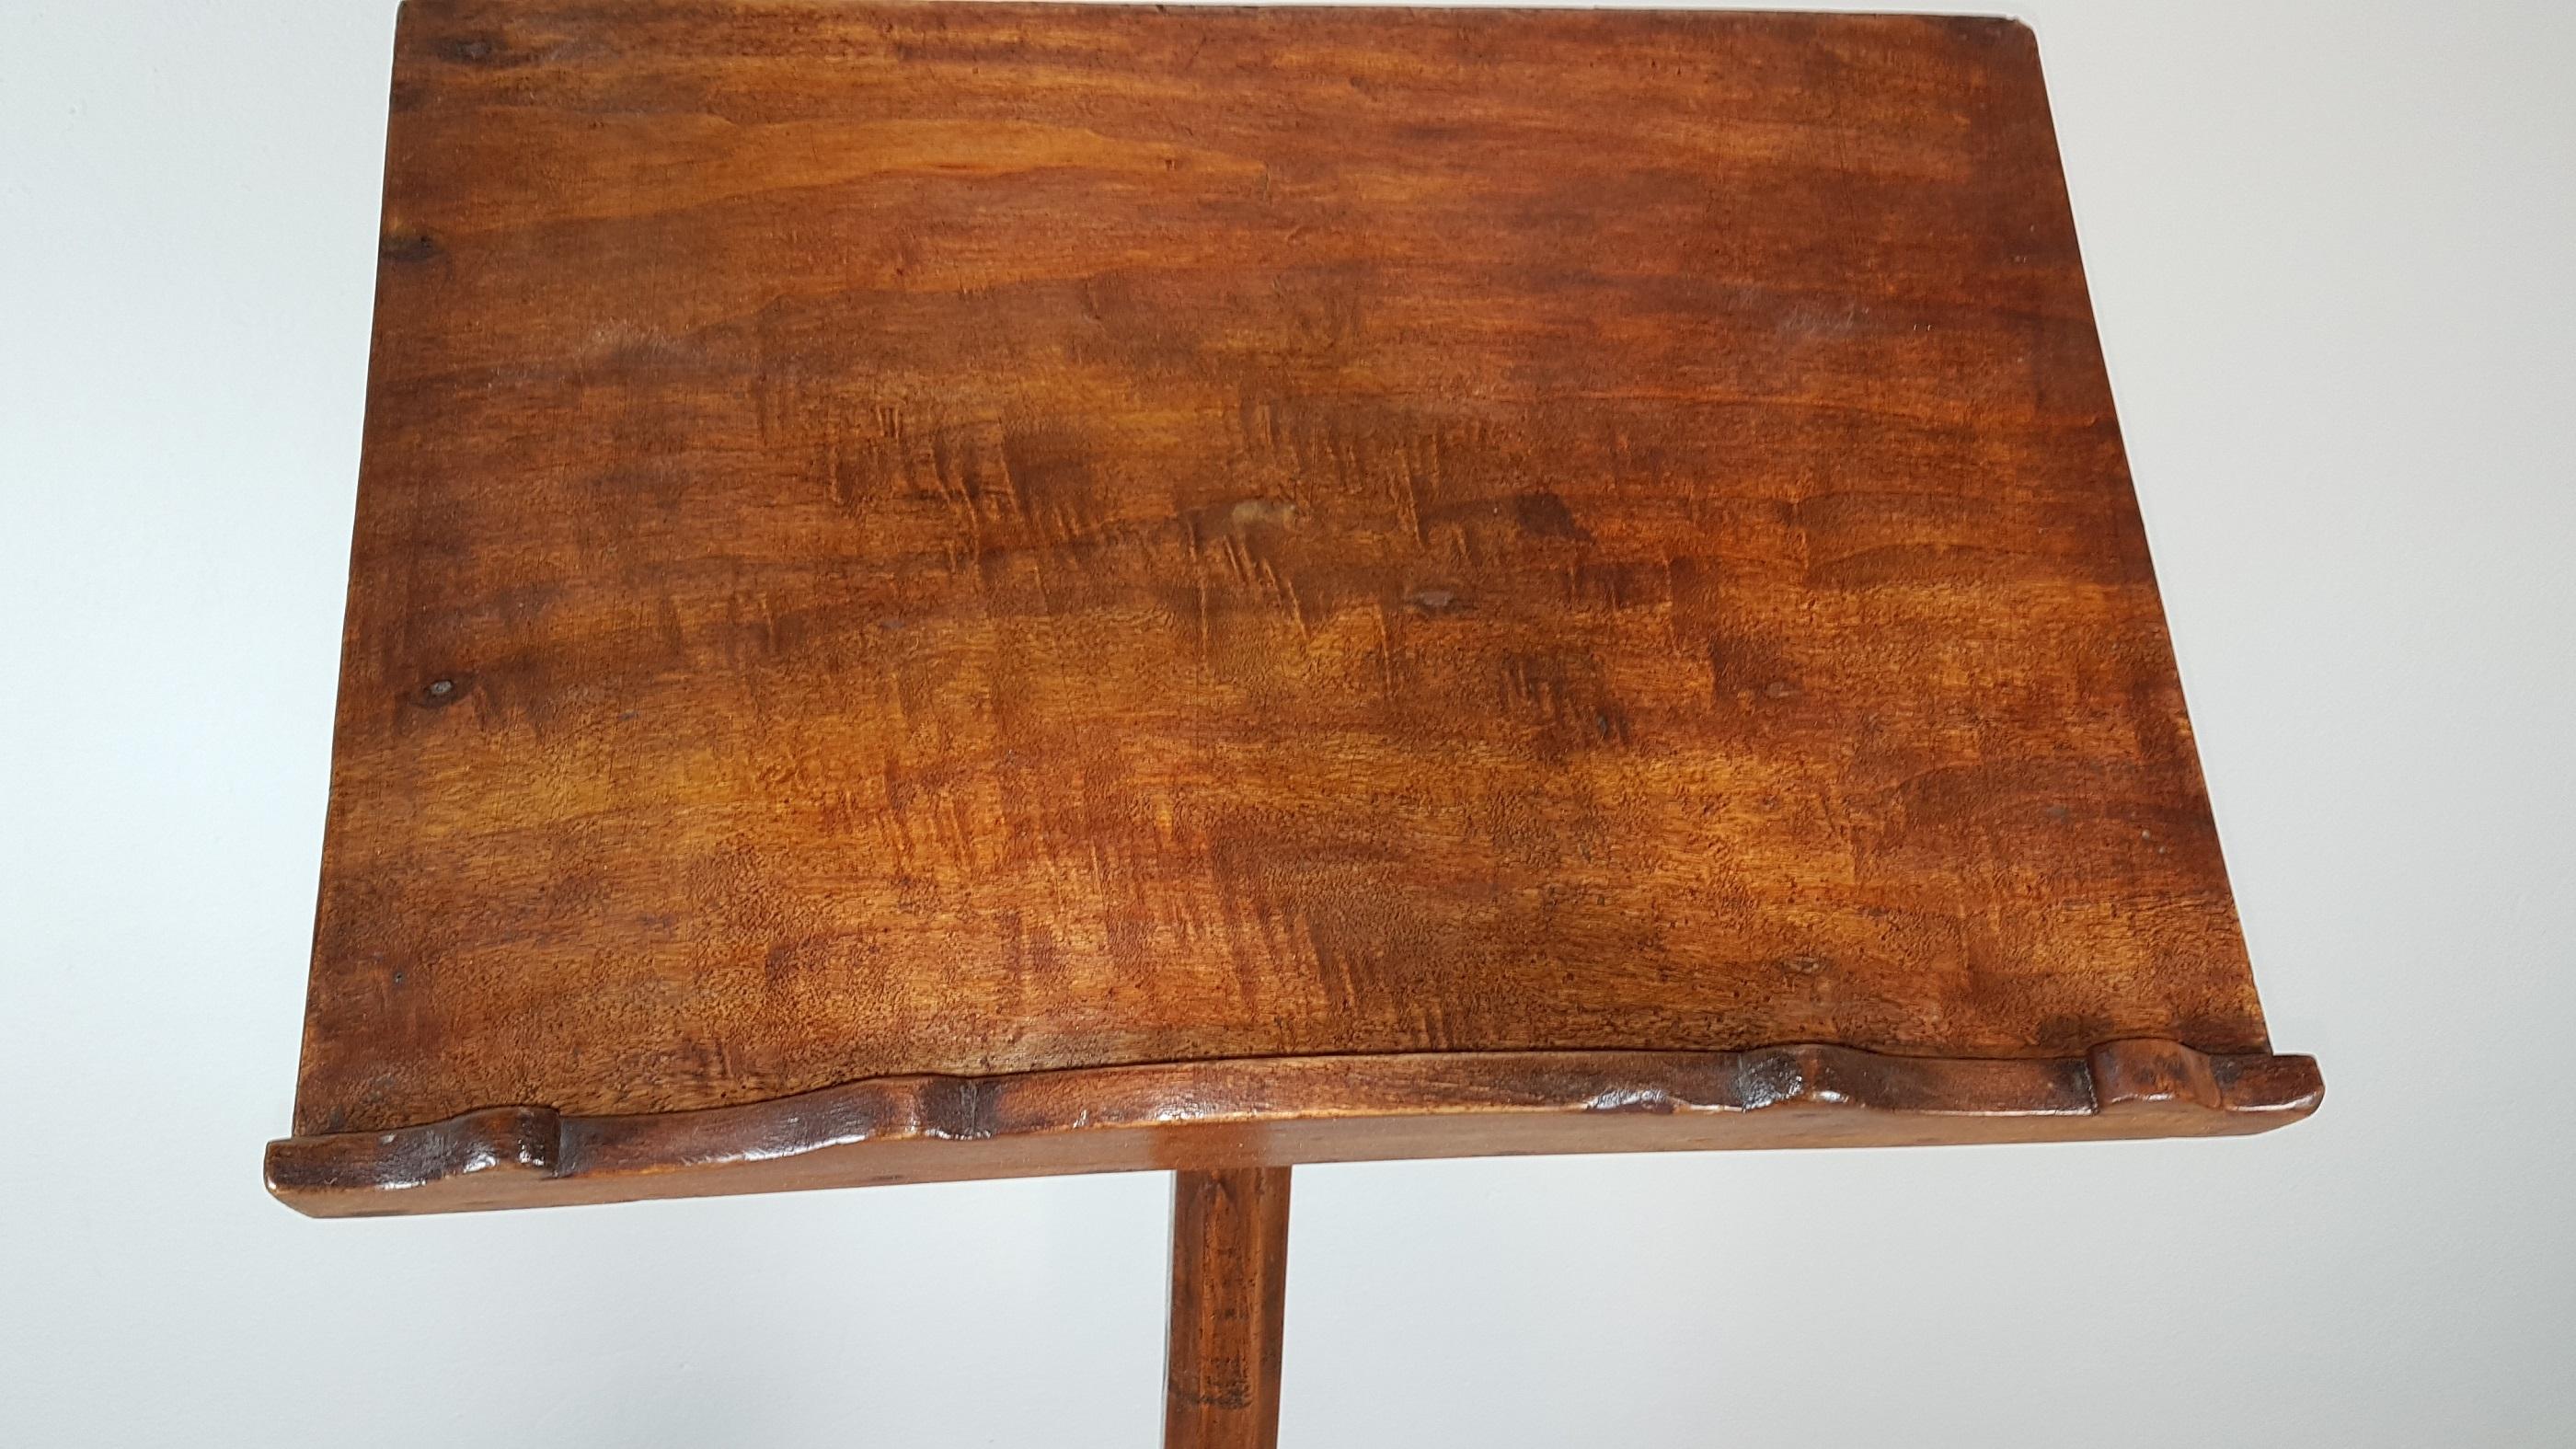 Beautiful antique music stand in solid poplar made in the late seventeenth century XVII. Typical line moved in the feet that suggests clear Piedmontese taste. The music stand is used but in perfect state of preservation had been restored by the